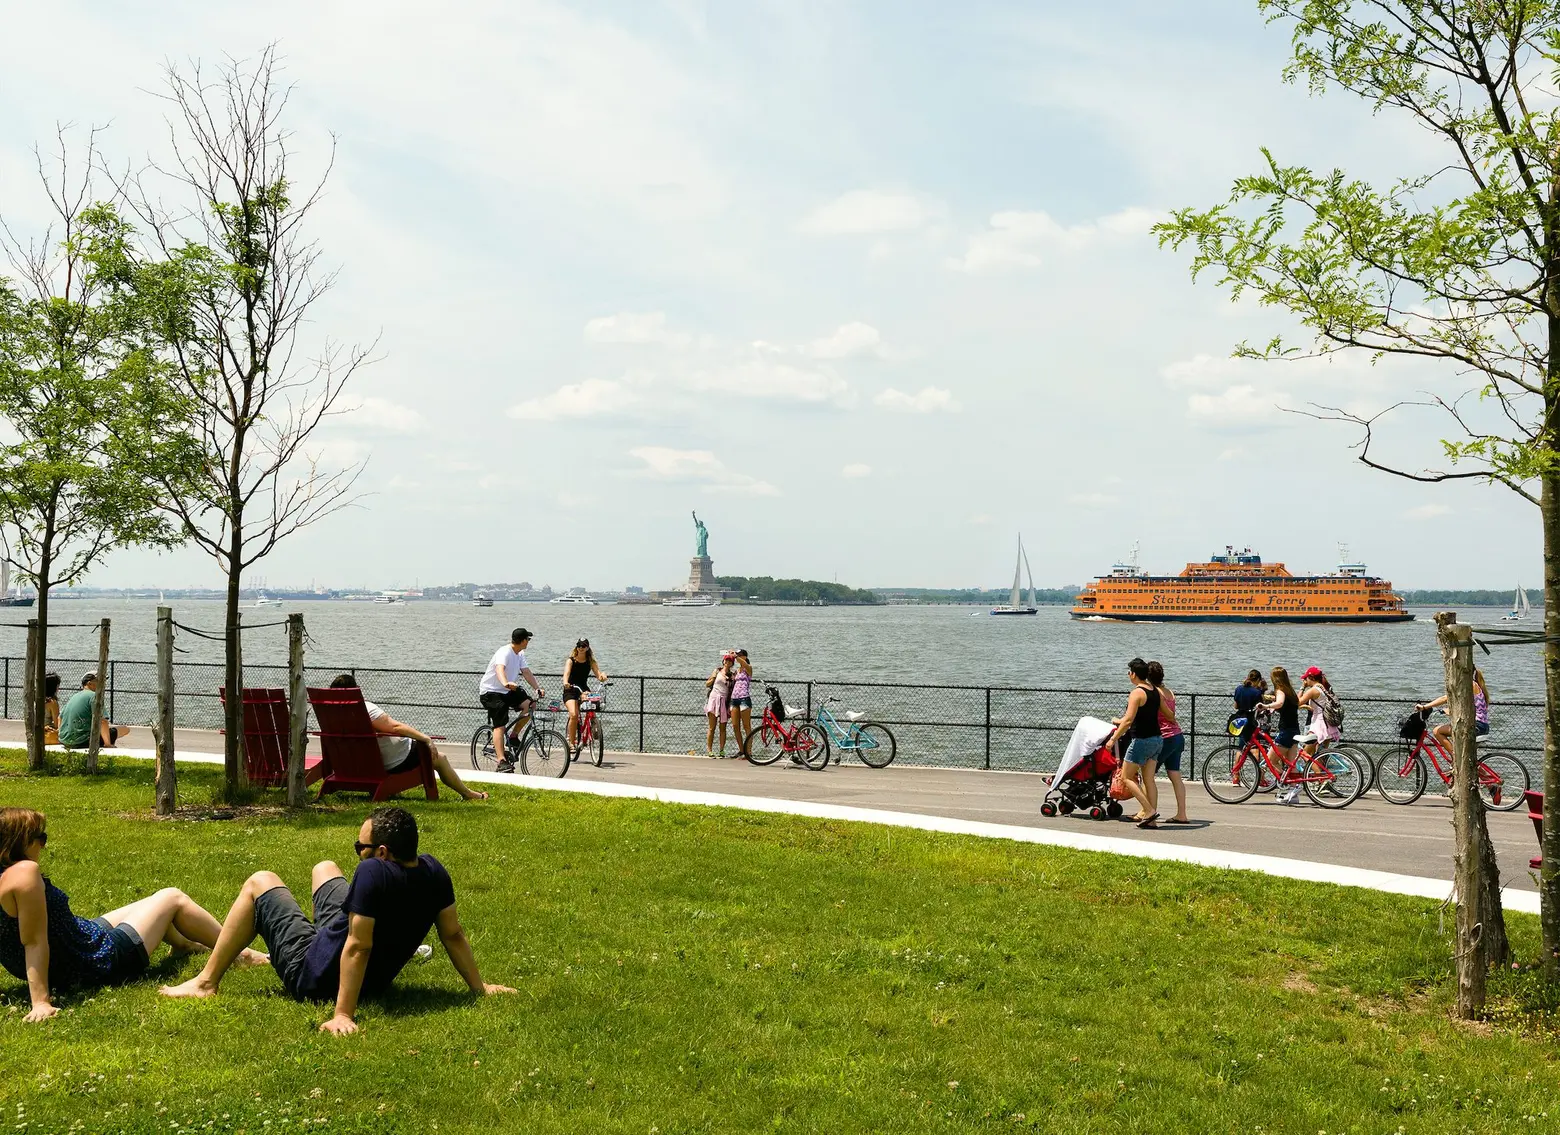 Governors Island reopens May 1 with new ferry stops and art exhibits